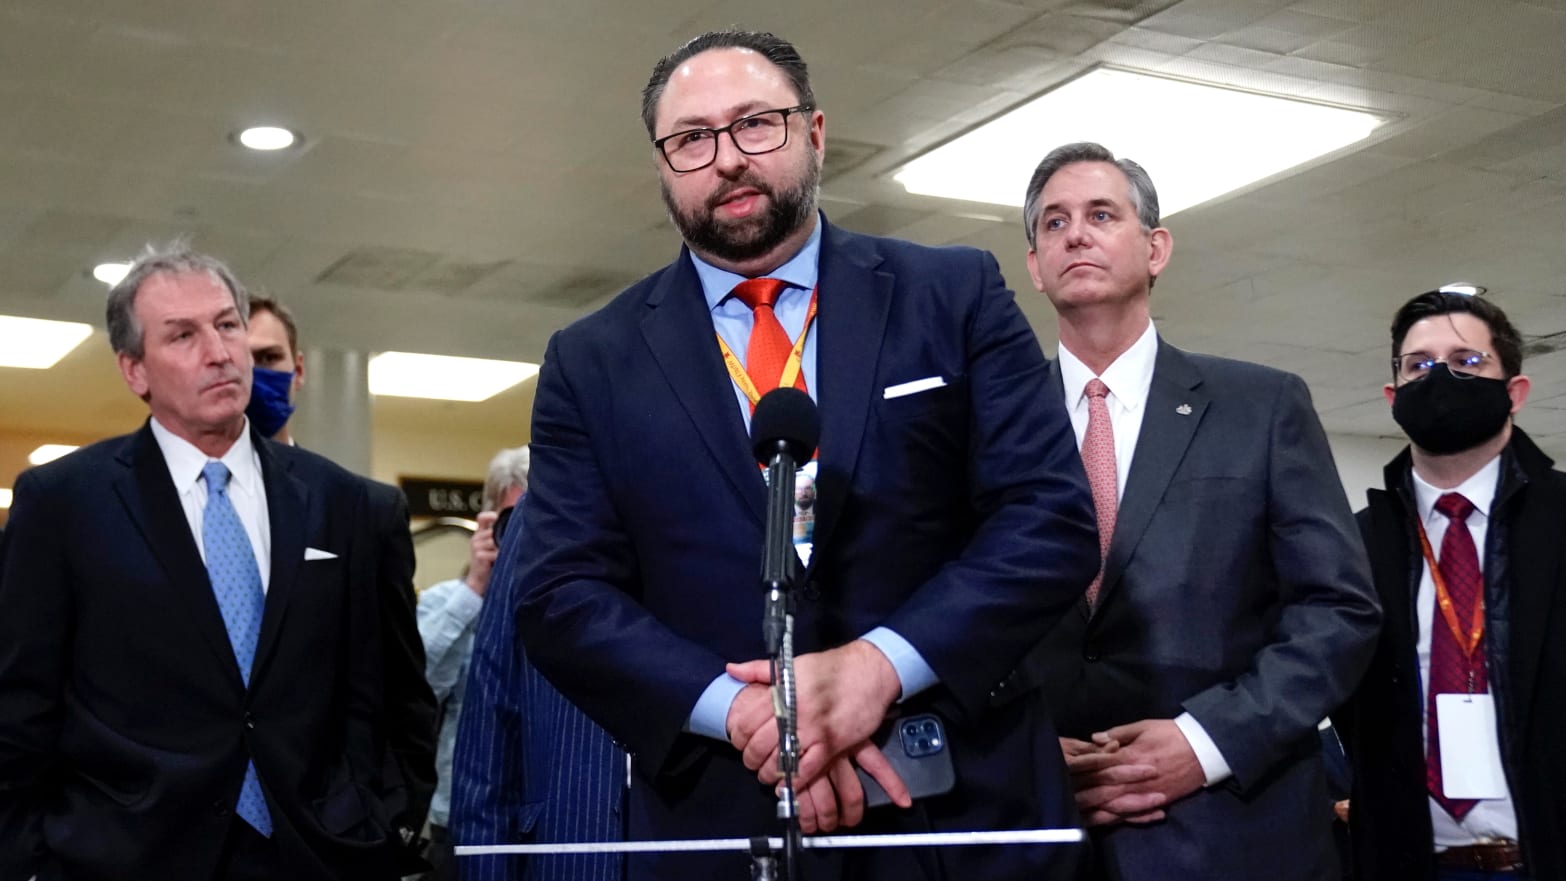 Jason Miller, former senior advisor to 2020 Trump campaign, speaks to members of the media after the Senate voted to acquit former President Trump during his impeachment trial in Washington, U.S. February 13, 2021.